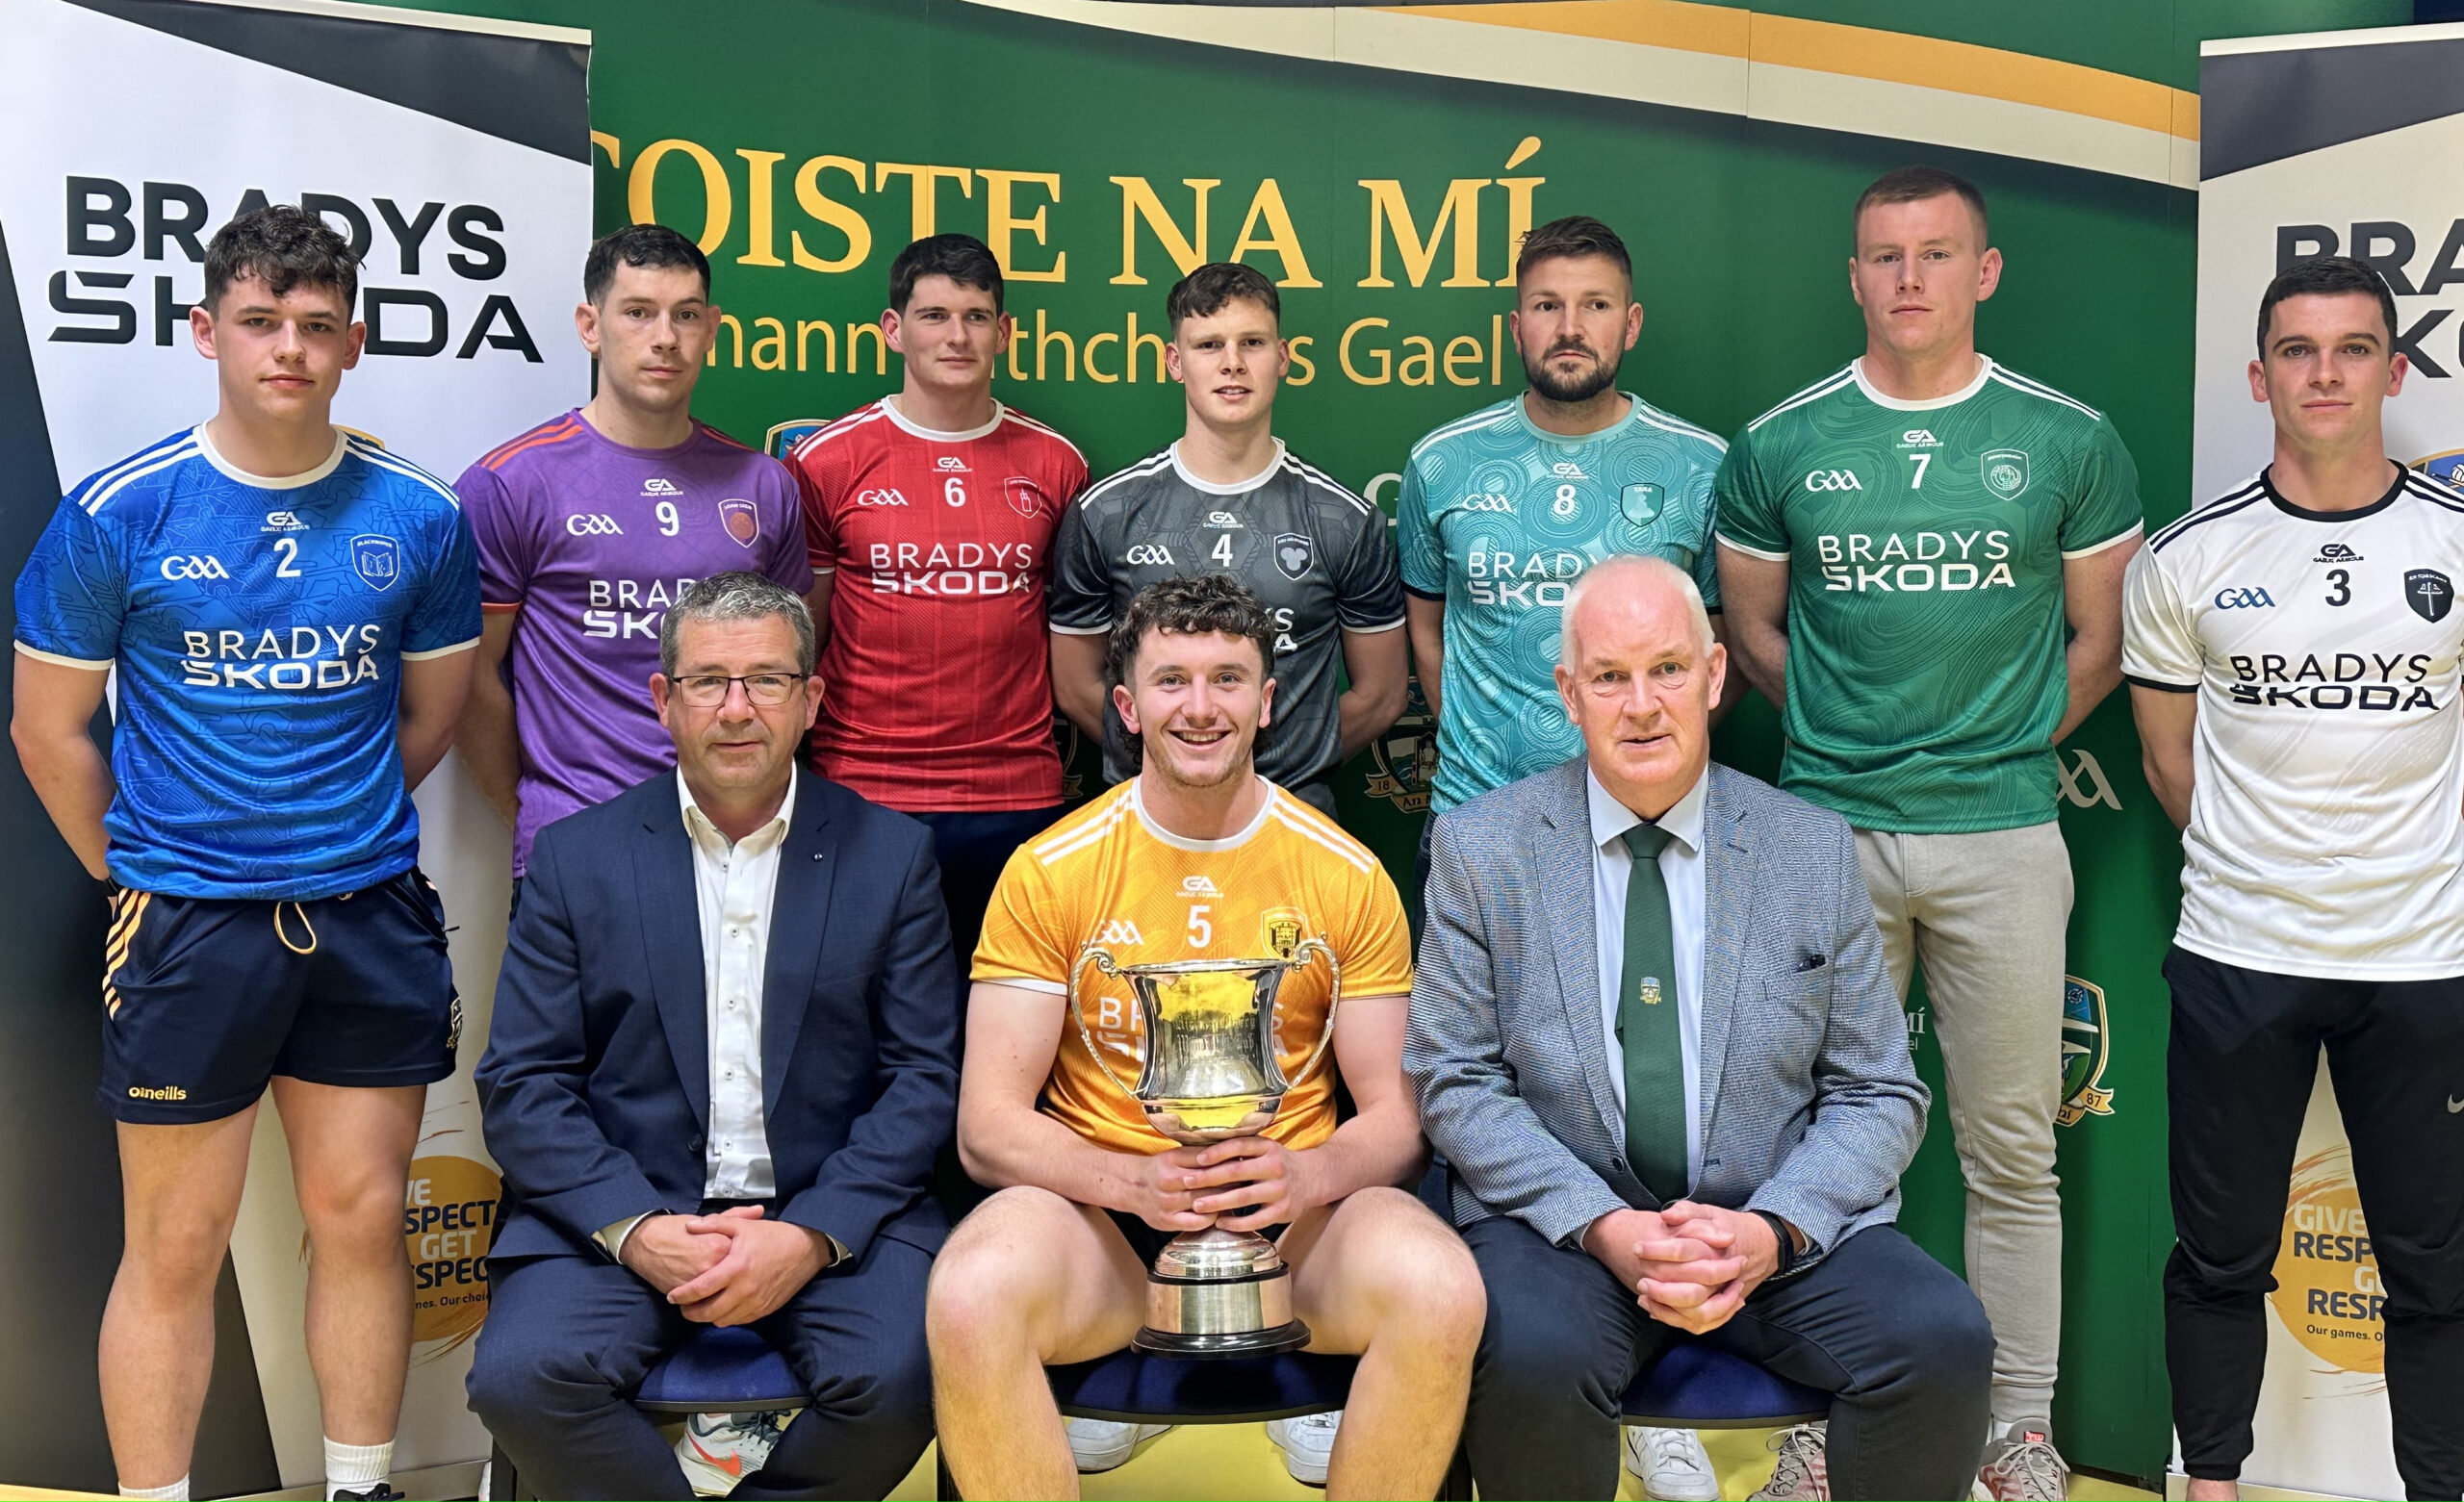 Regional Football Championship set to commence